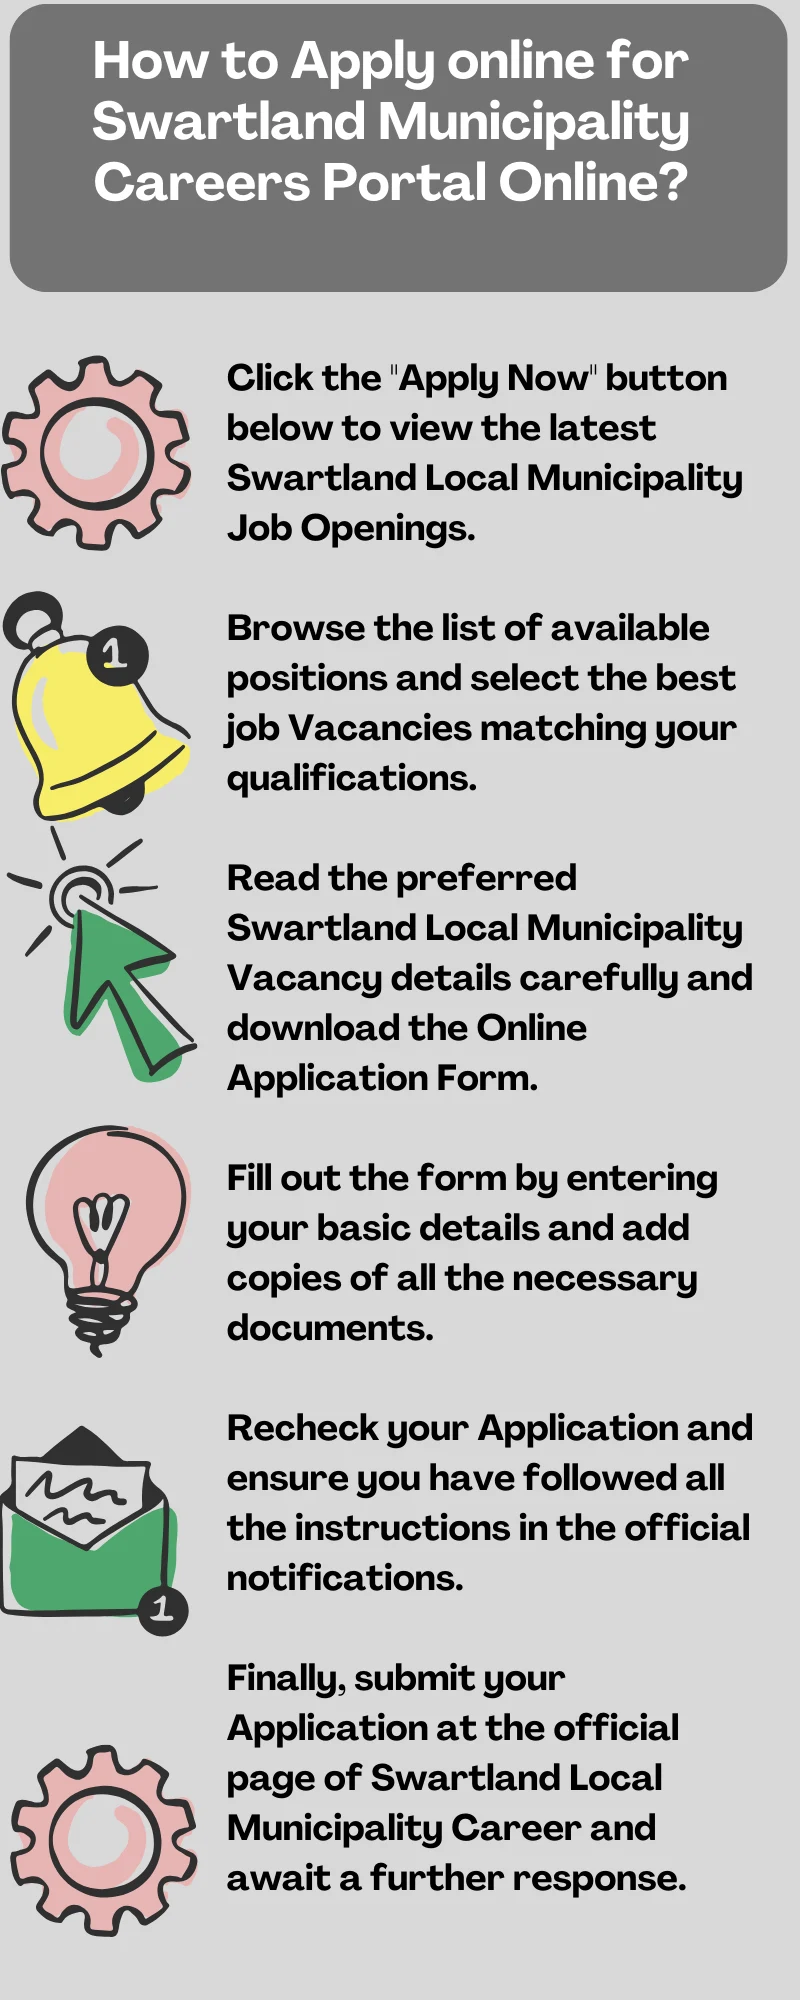 How to Apply online for Swartland Municipality Careers Portal Online?